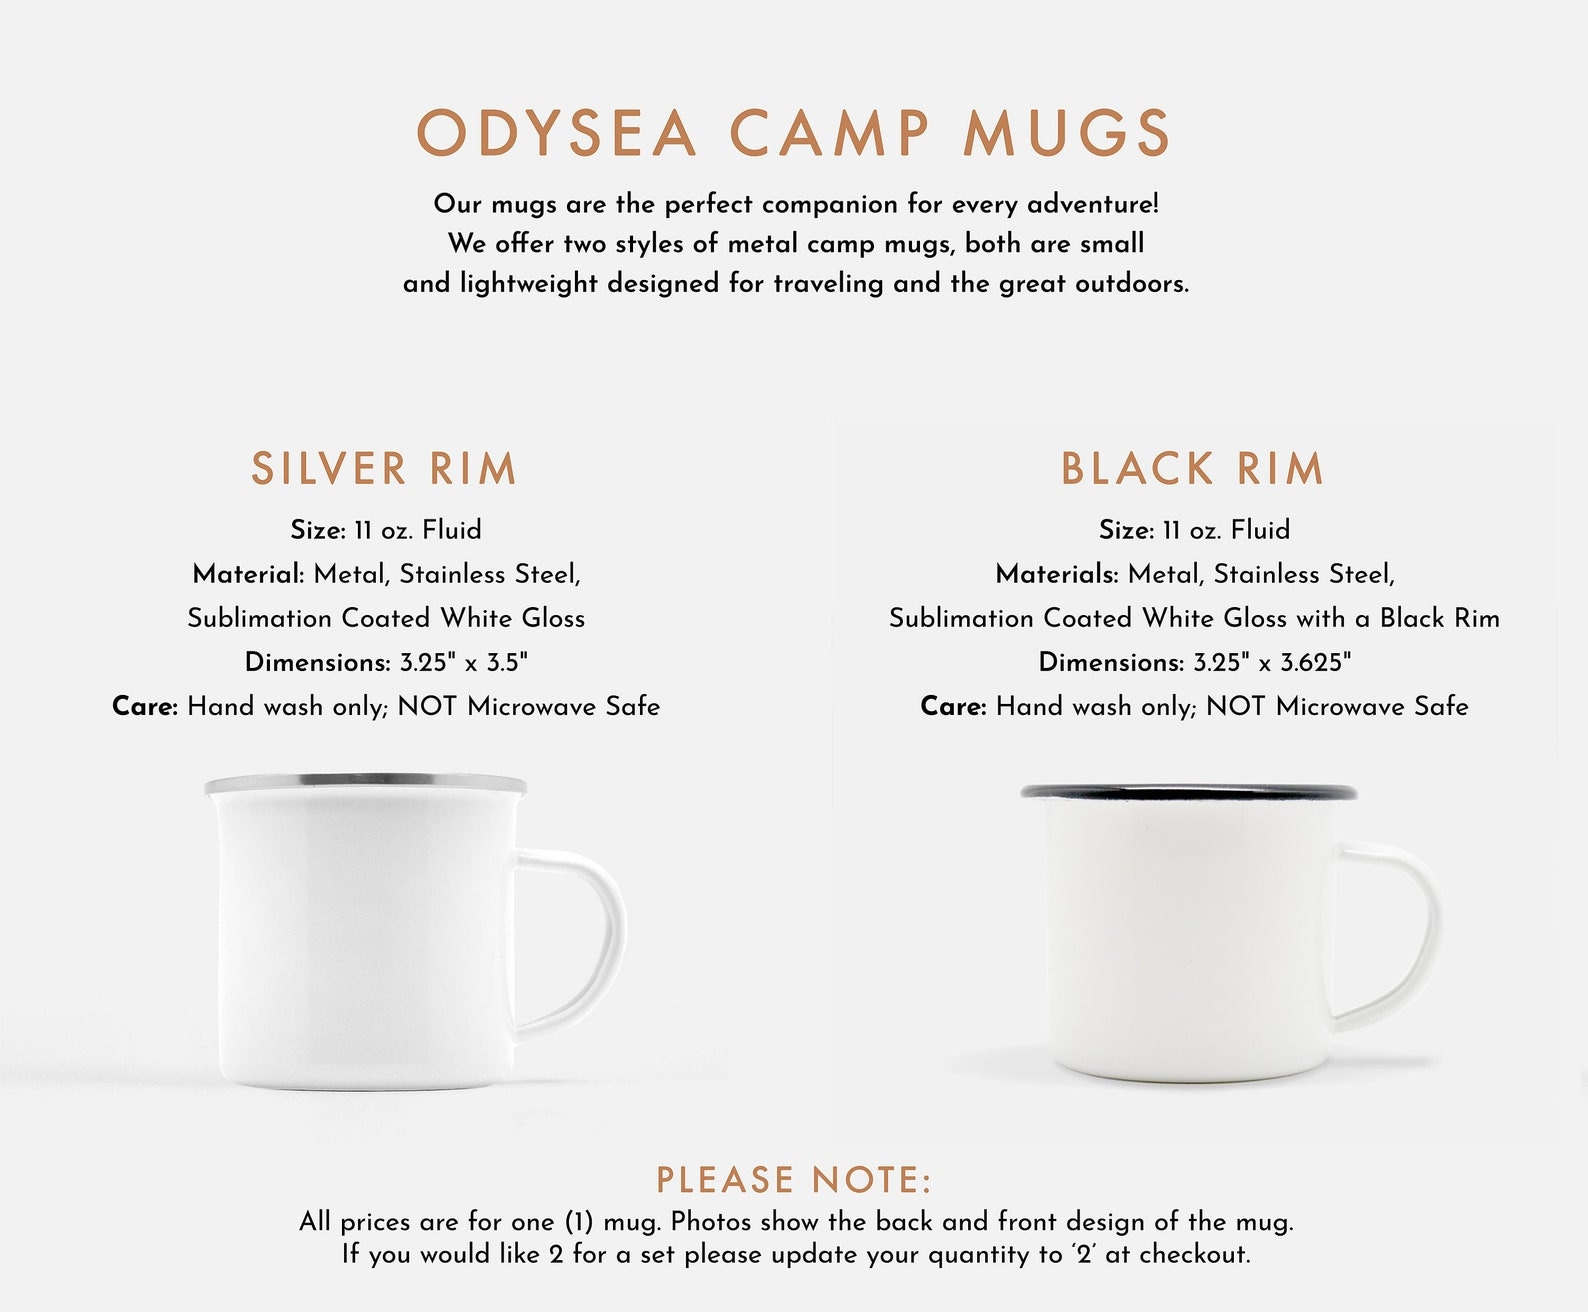 Enamel Coated Stainless Steel Camping Mugs His and Hers Mr and Mrs Mugs